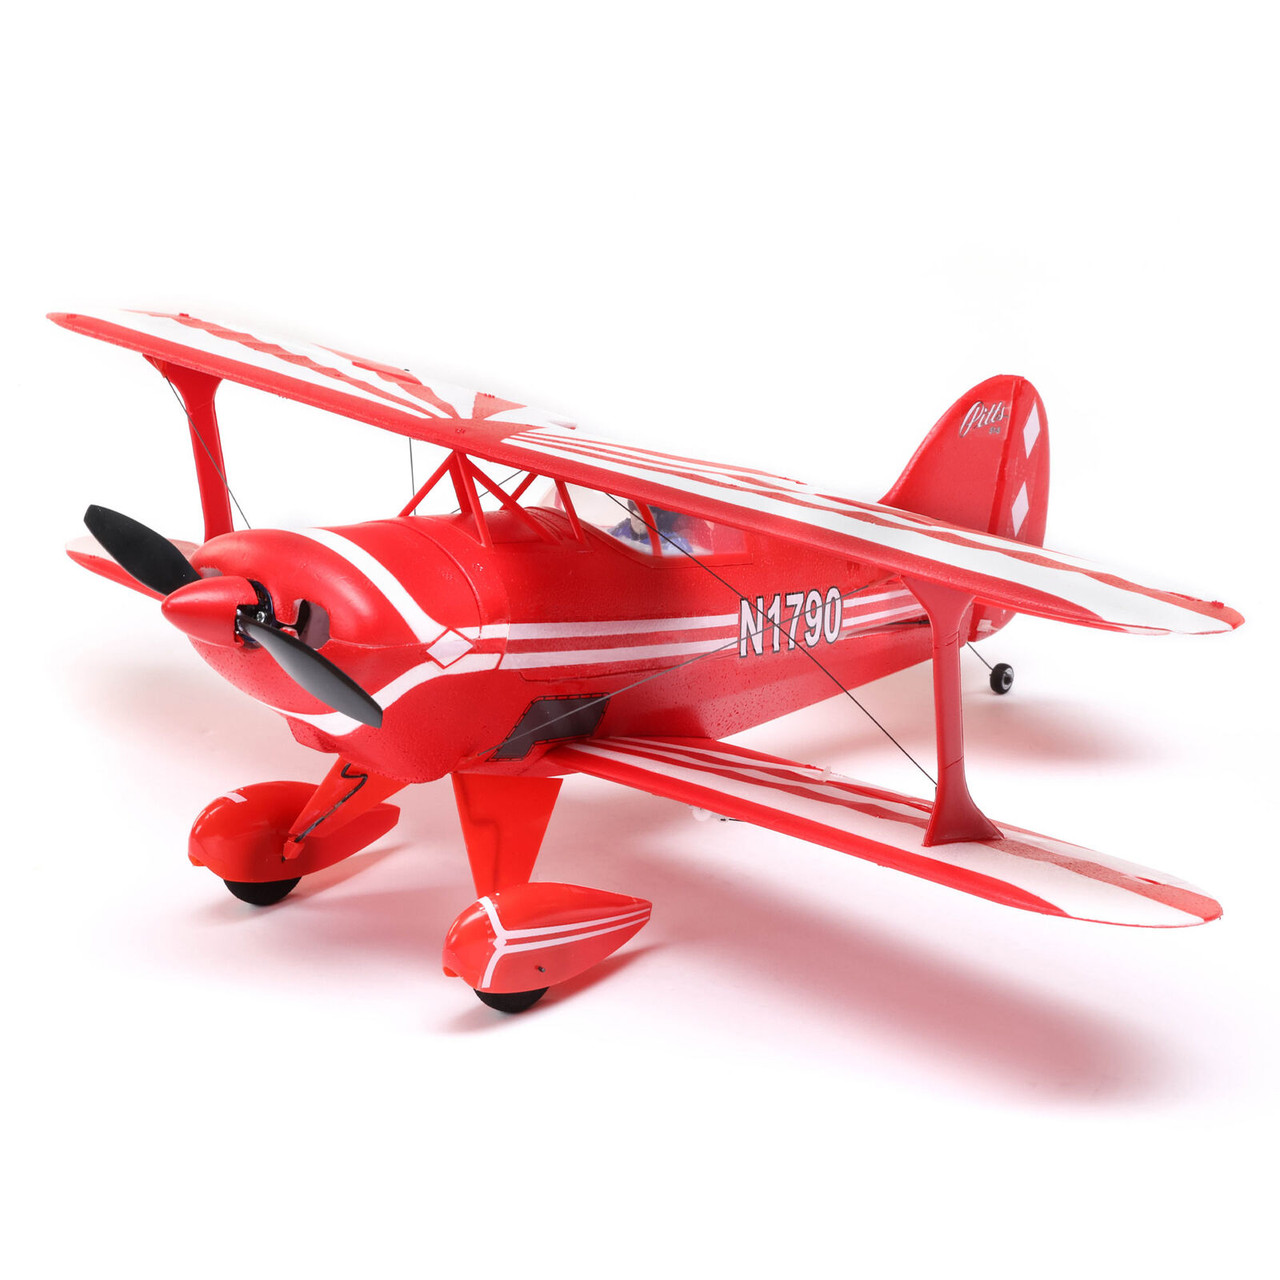 Eflite UMX Pitts S-1S BNF Basic with AS3X and SAFE Select